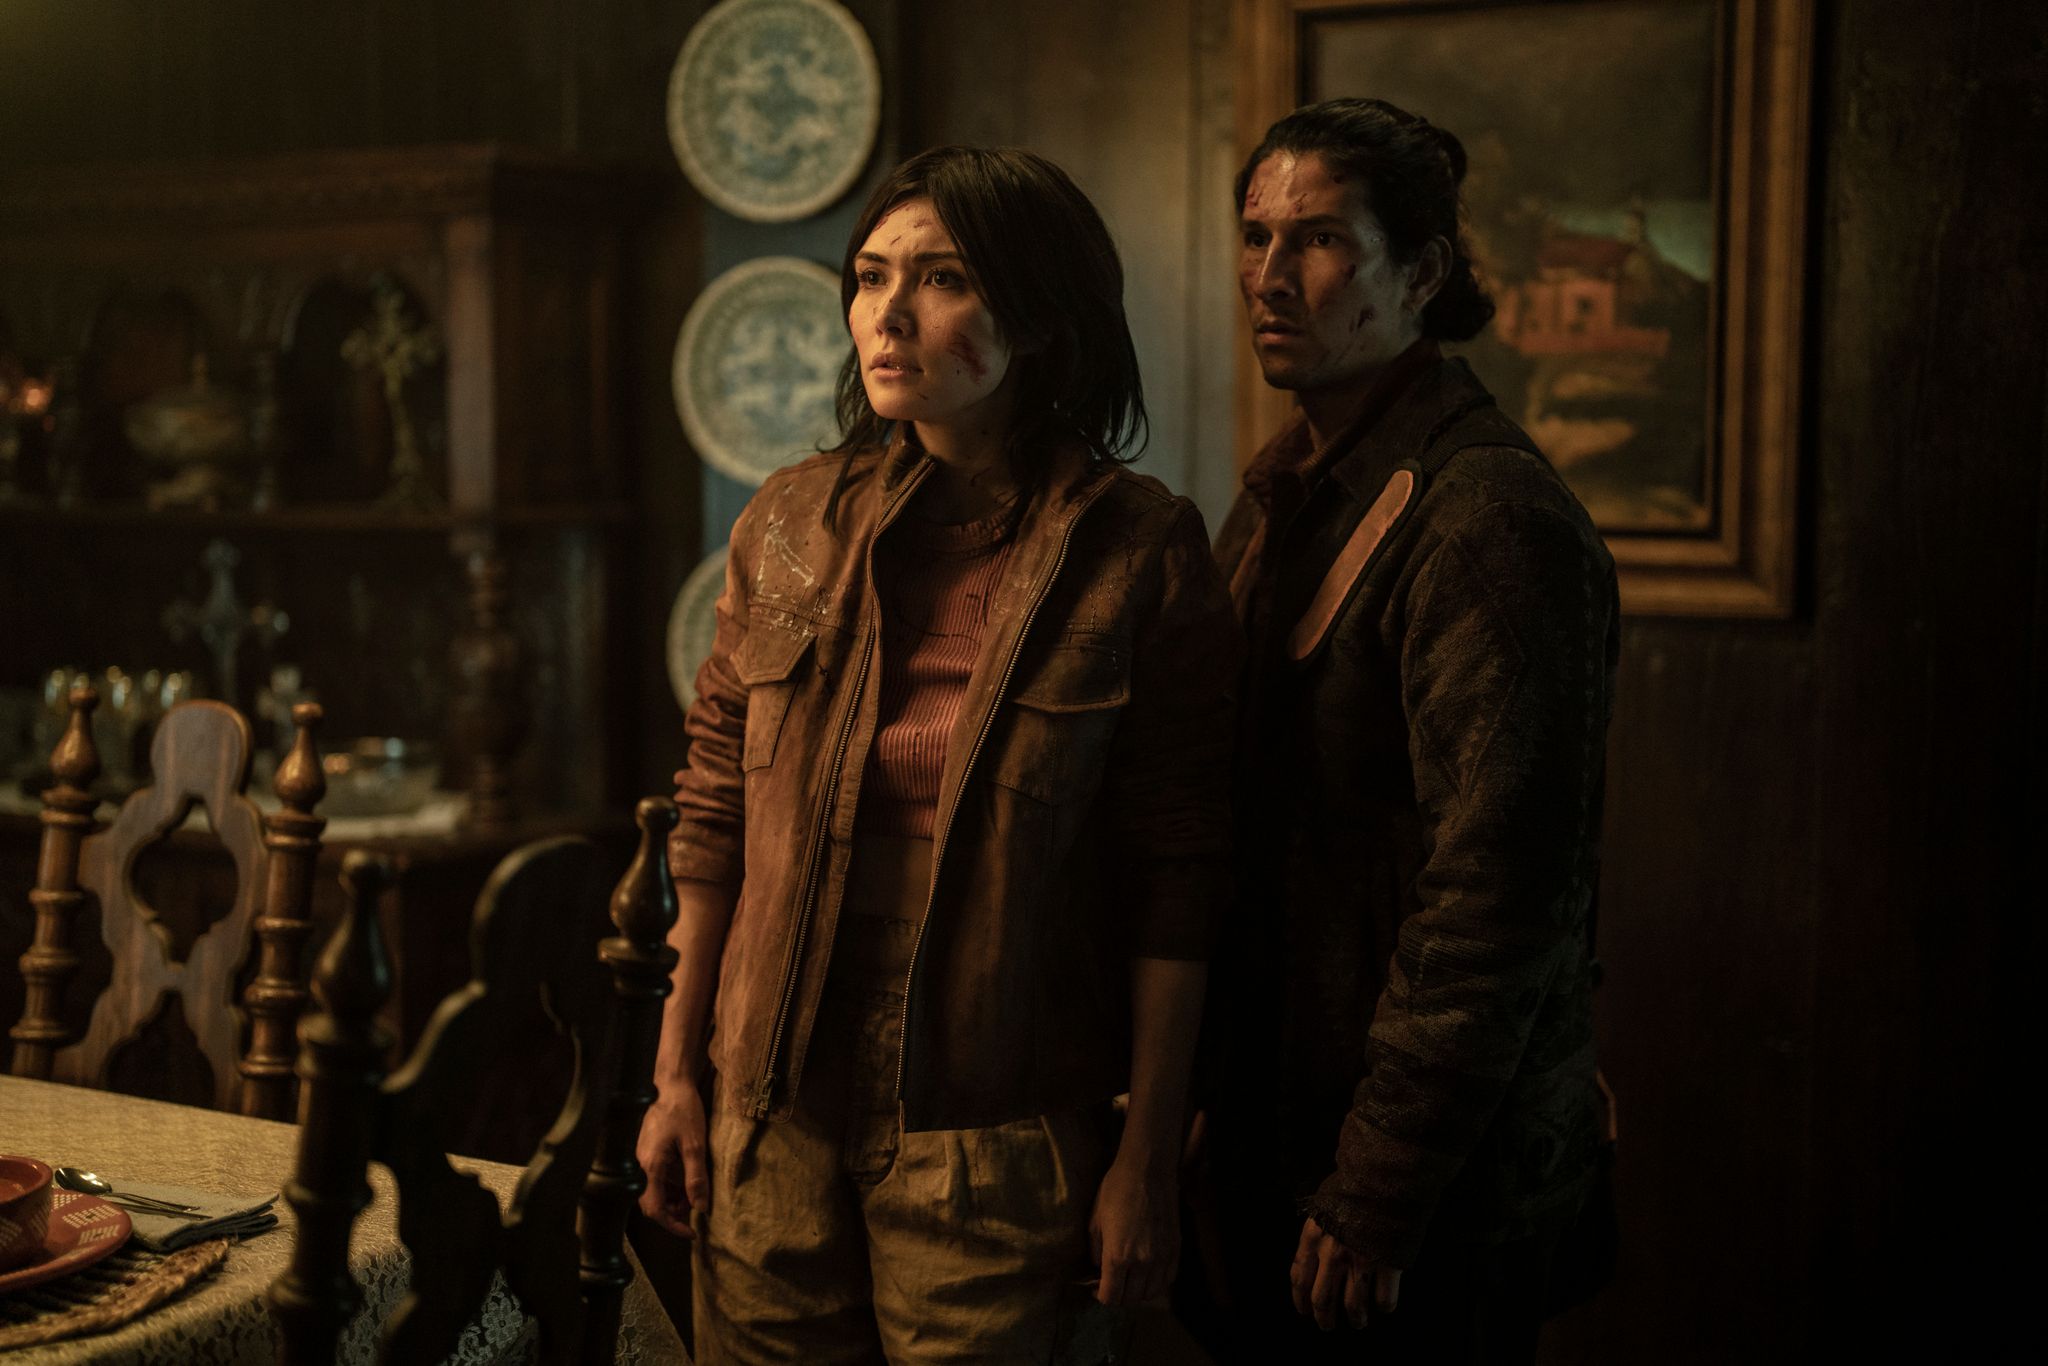 Daniella Pineda as Idalia and Danny Ramirez as Eric in character in Tales of the Walking Dead standing in a fancy-looking dining room